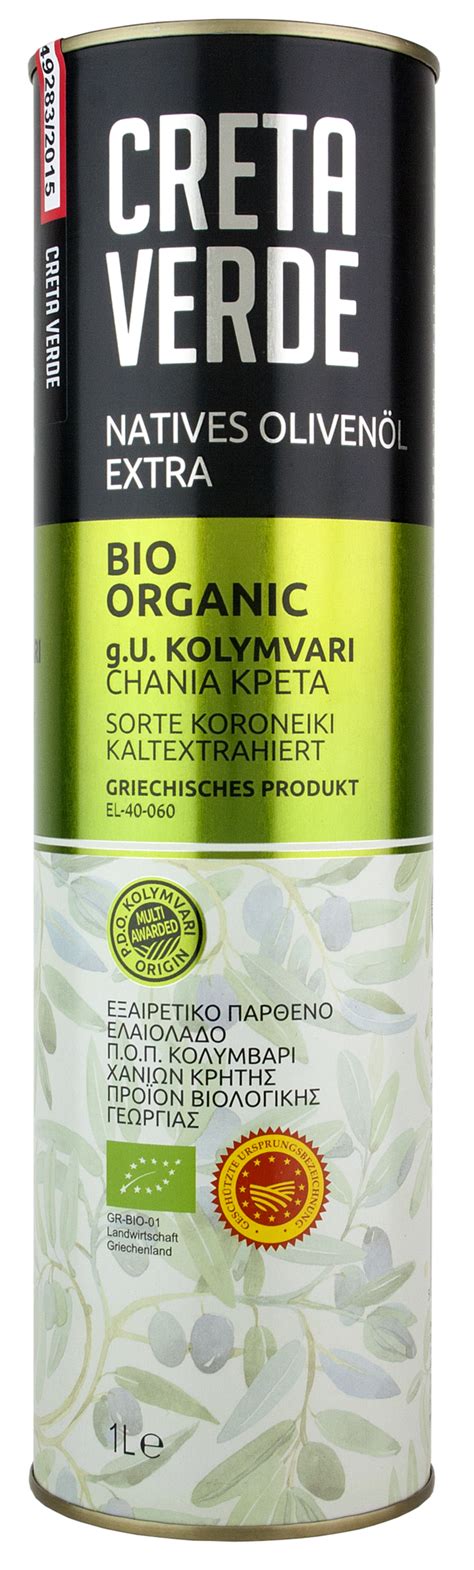 A PDO-certified extra virgin olive oil made exclusively from organically farmed Koroneiki olives grown in Western Cretes renowned Kolymvari region, an area famous for producing exceptional olive oil due to its unique microclimate. . Creta verde olive oil review